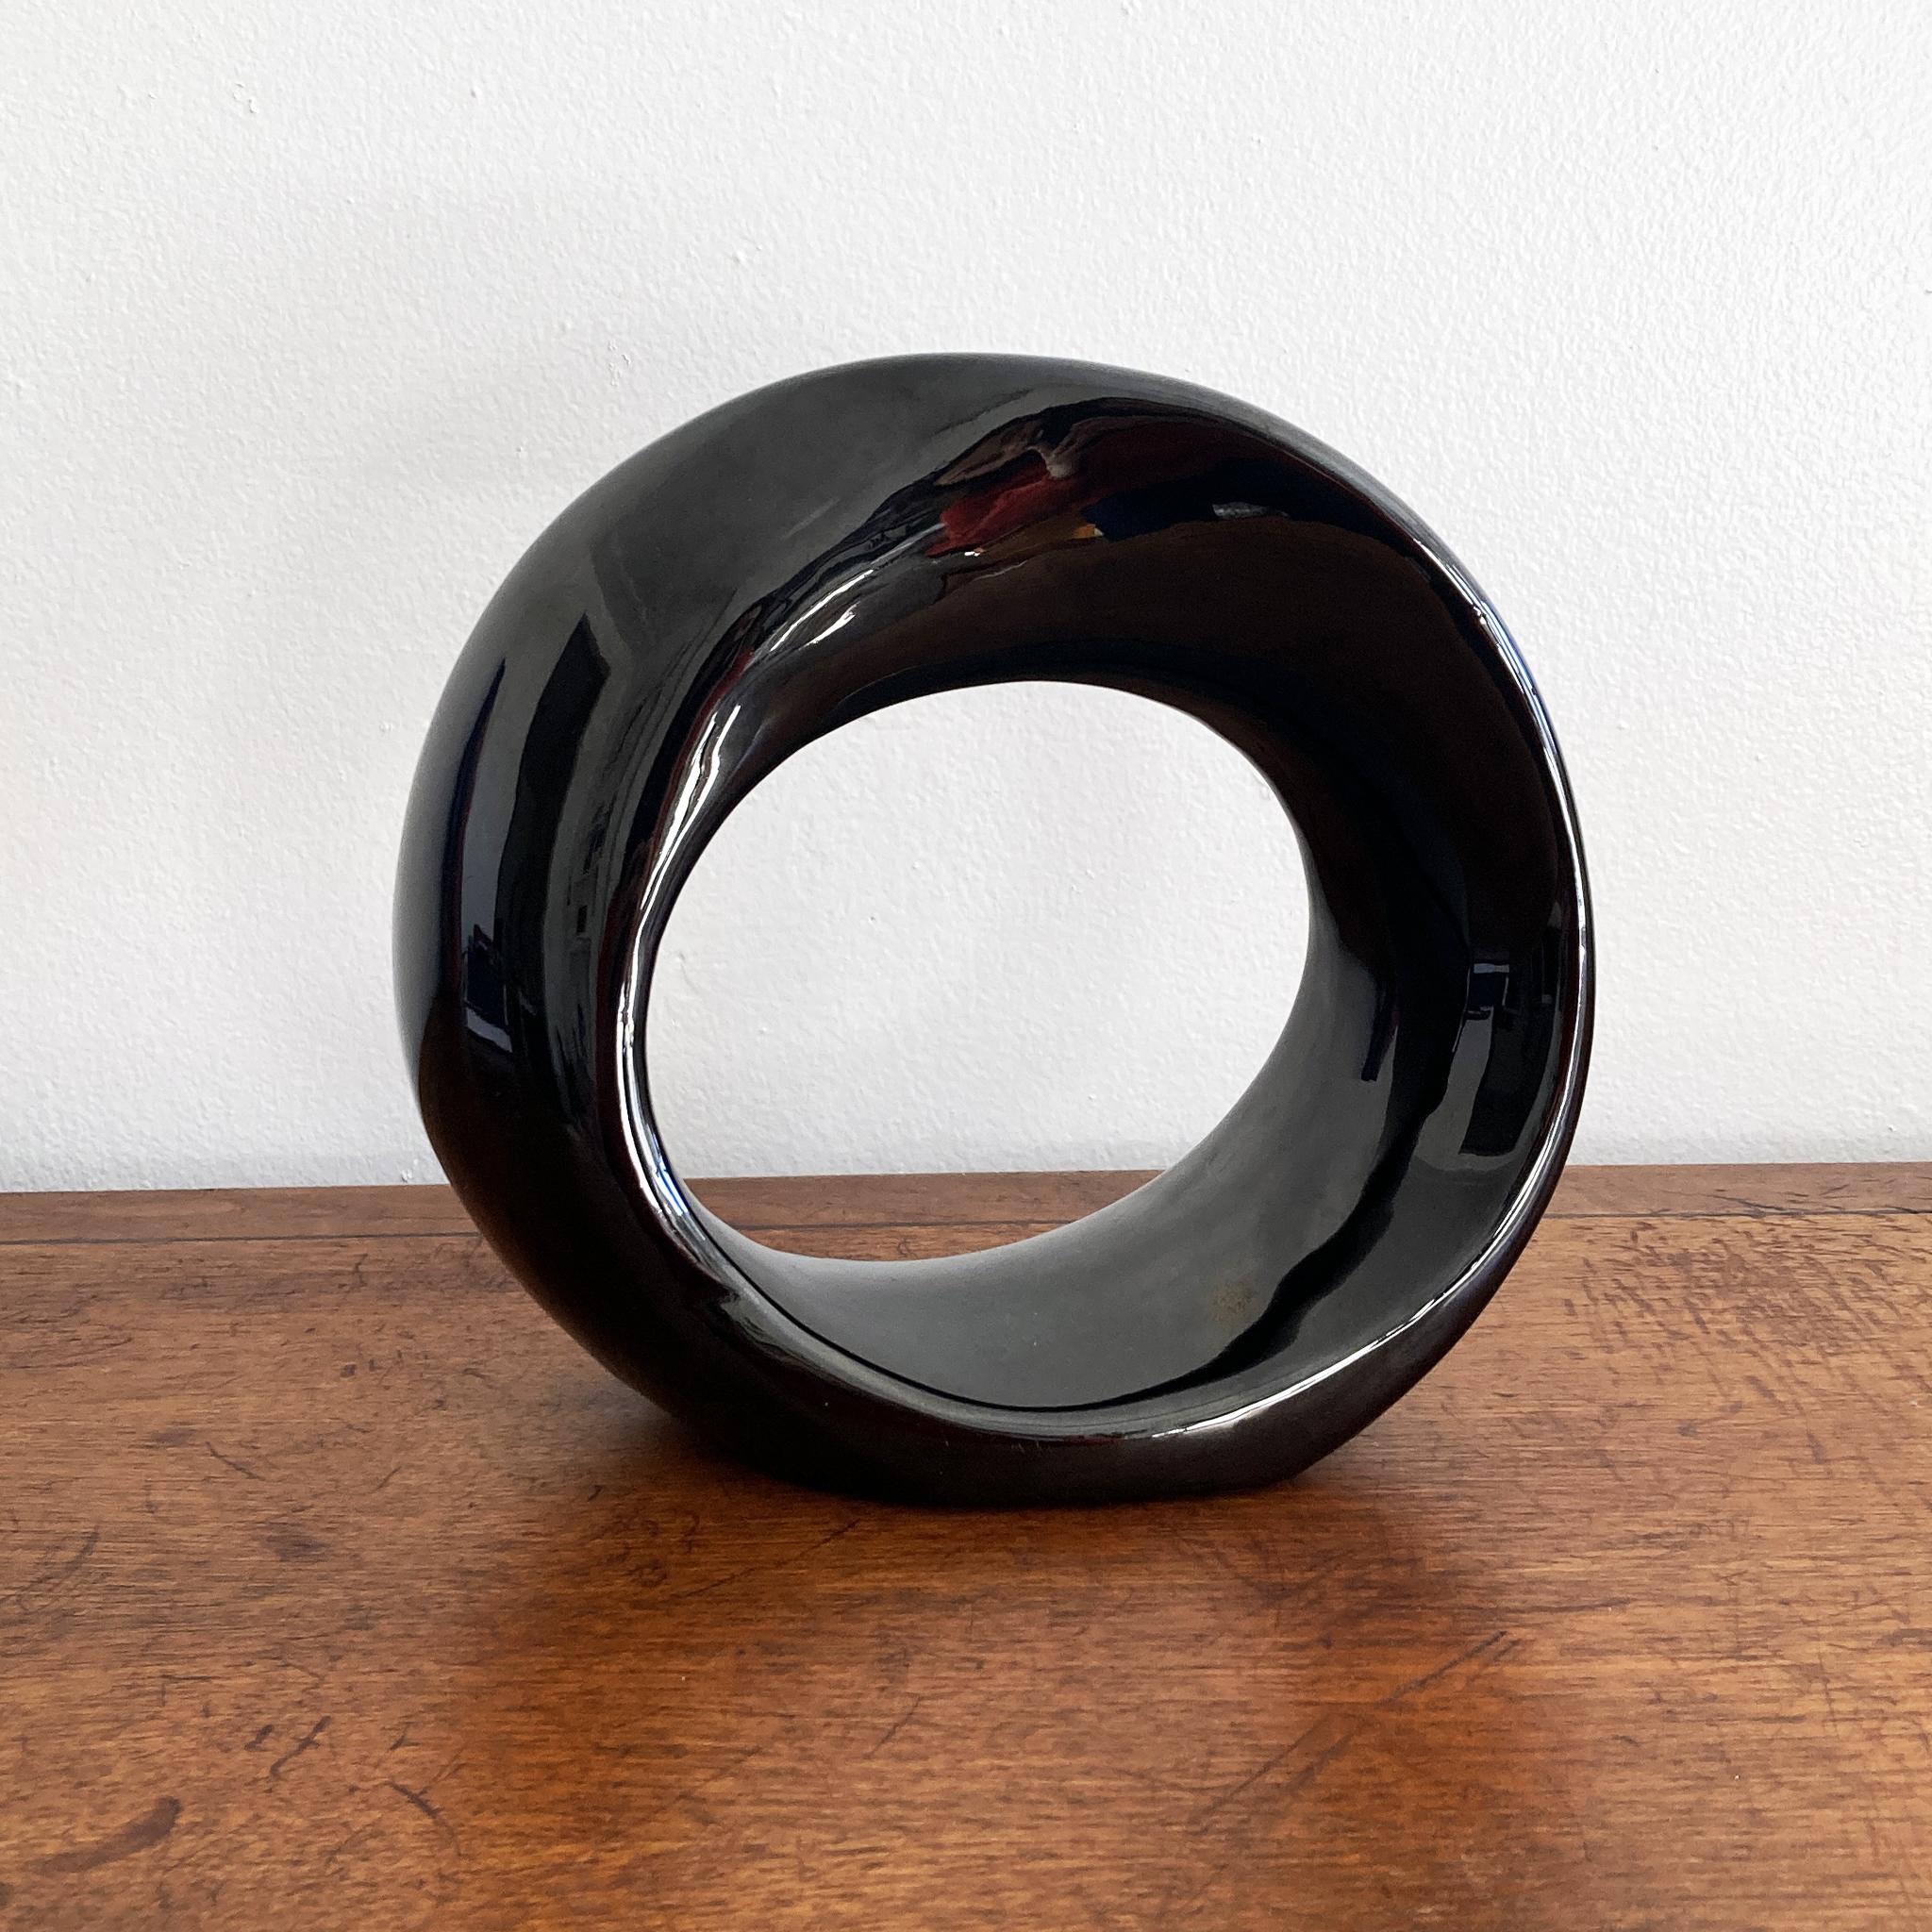 Ceramic Haeger Gloss Black Postmodern Abstract Circular Twisted Orb Sculpture For Sale